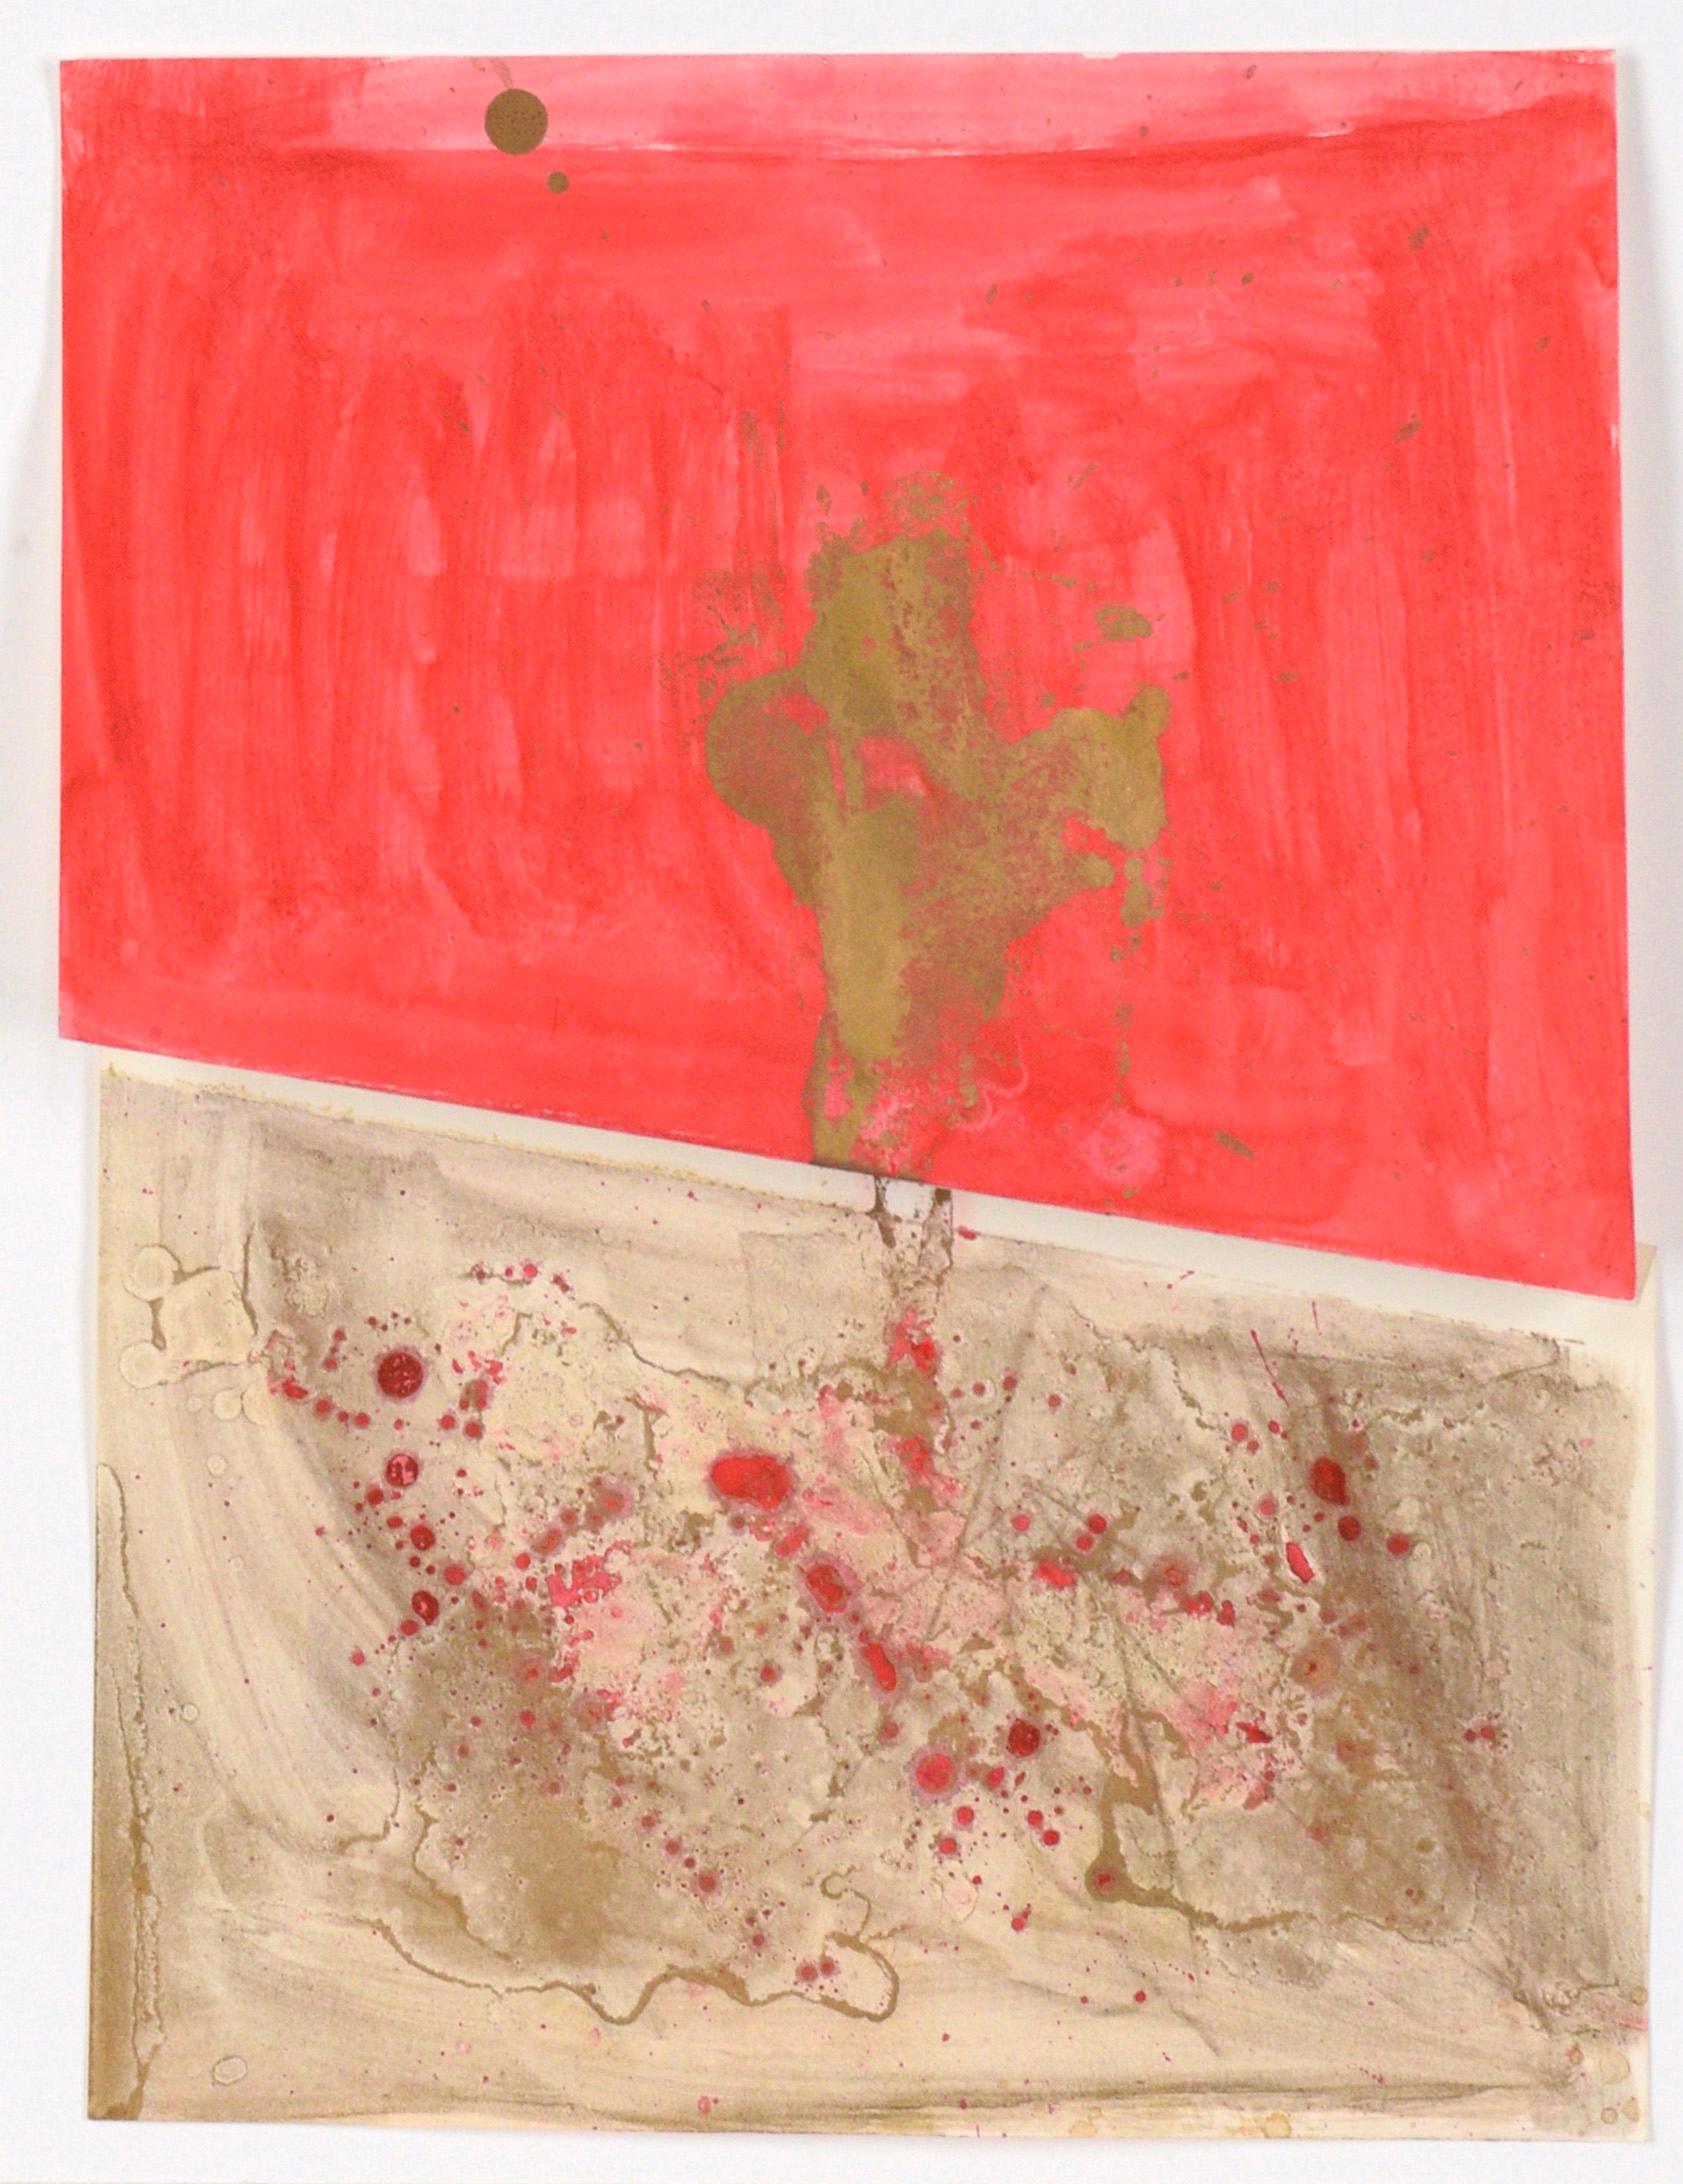 Folded Red and Gold Abstract Expressionist Composition in Acrylic on Paper - Painting by Ricardo de Silva